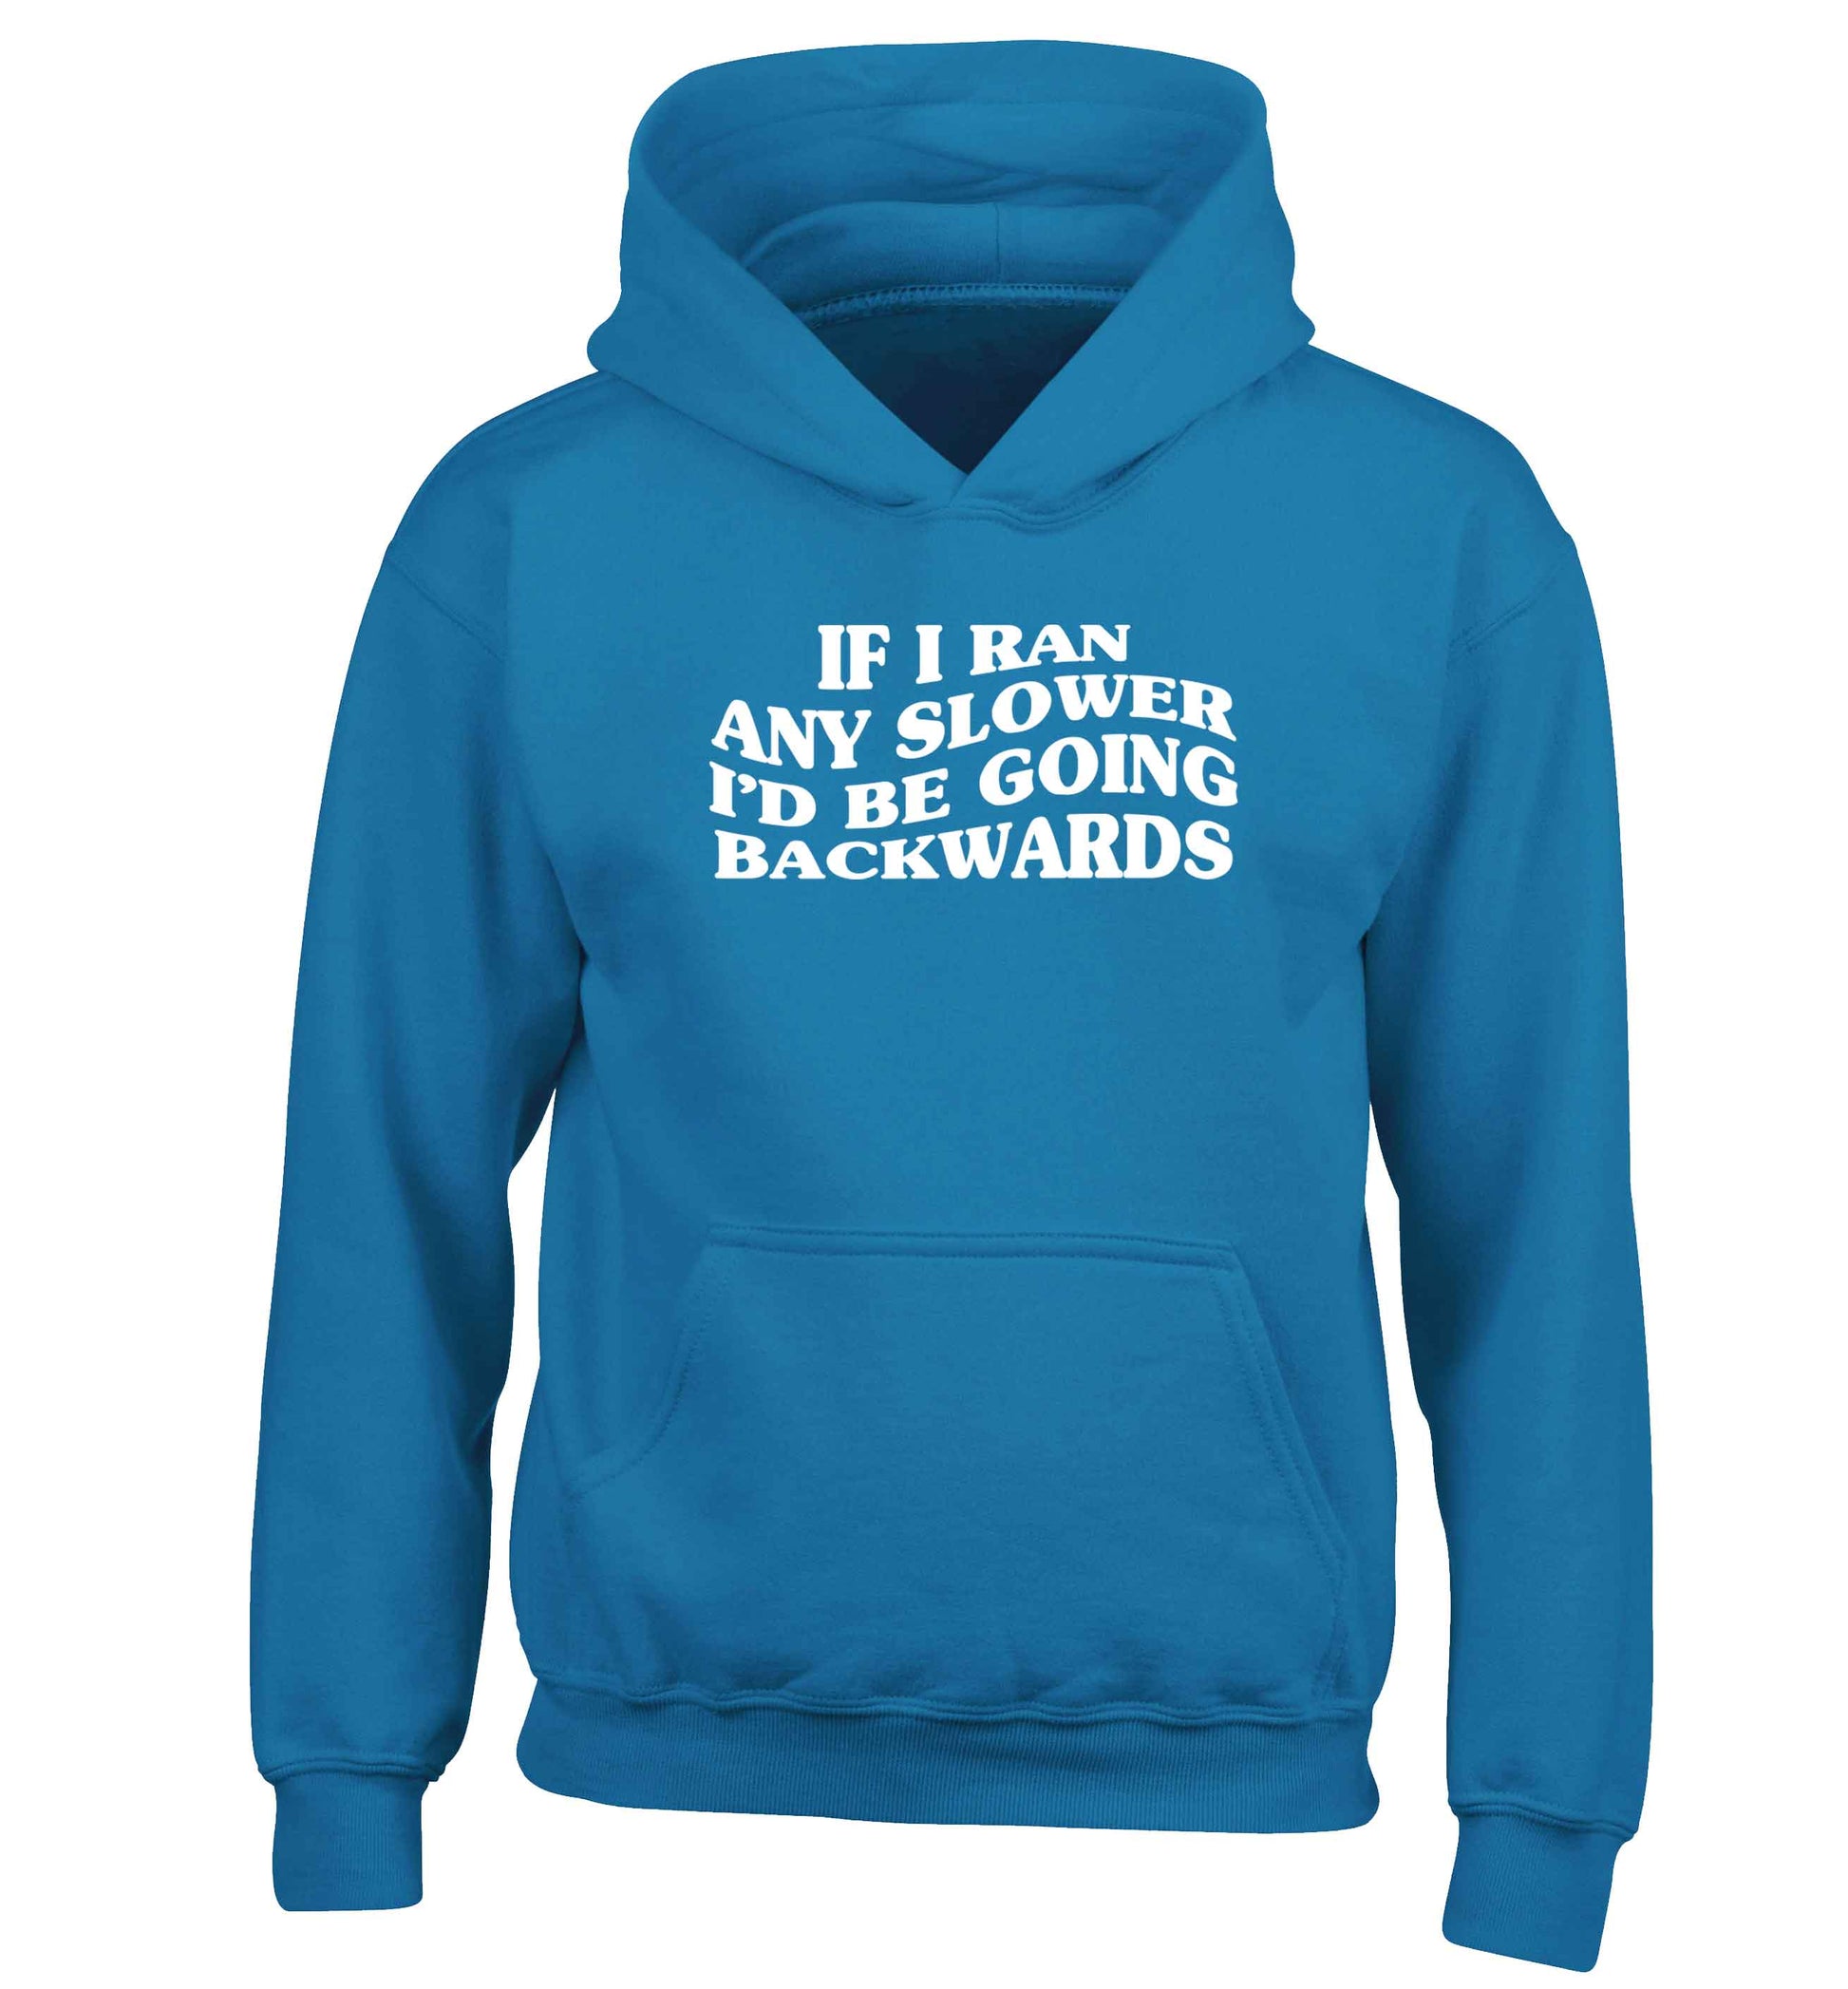 If I ran any slower I'd be going backwards children's blue hoodie 12-13 Years